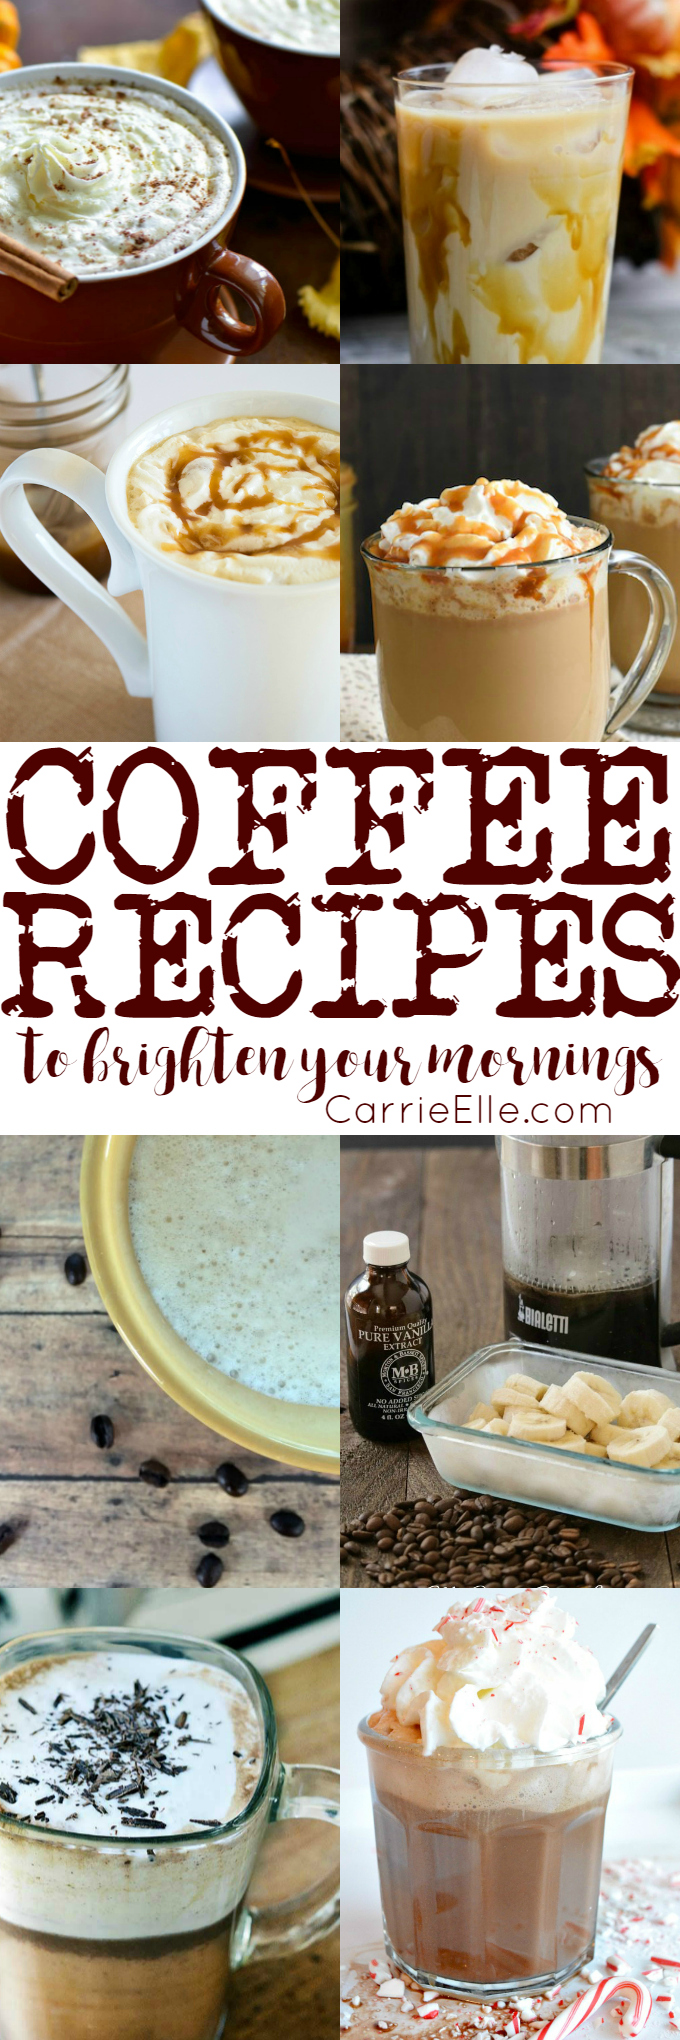 Creative Coffee Recipes - Carrie Elle